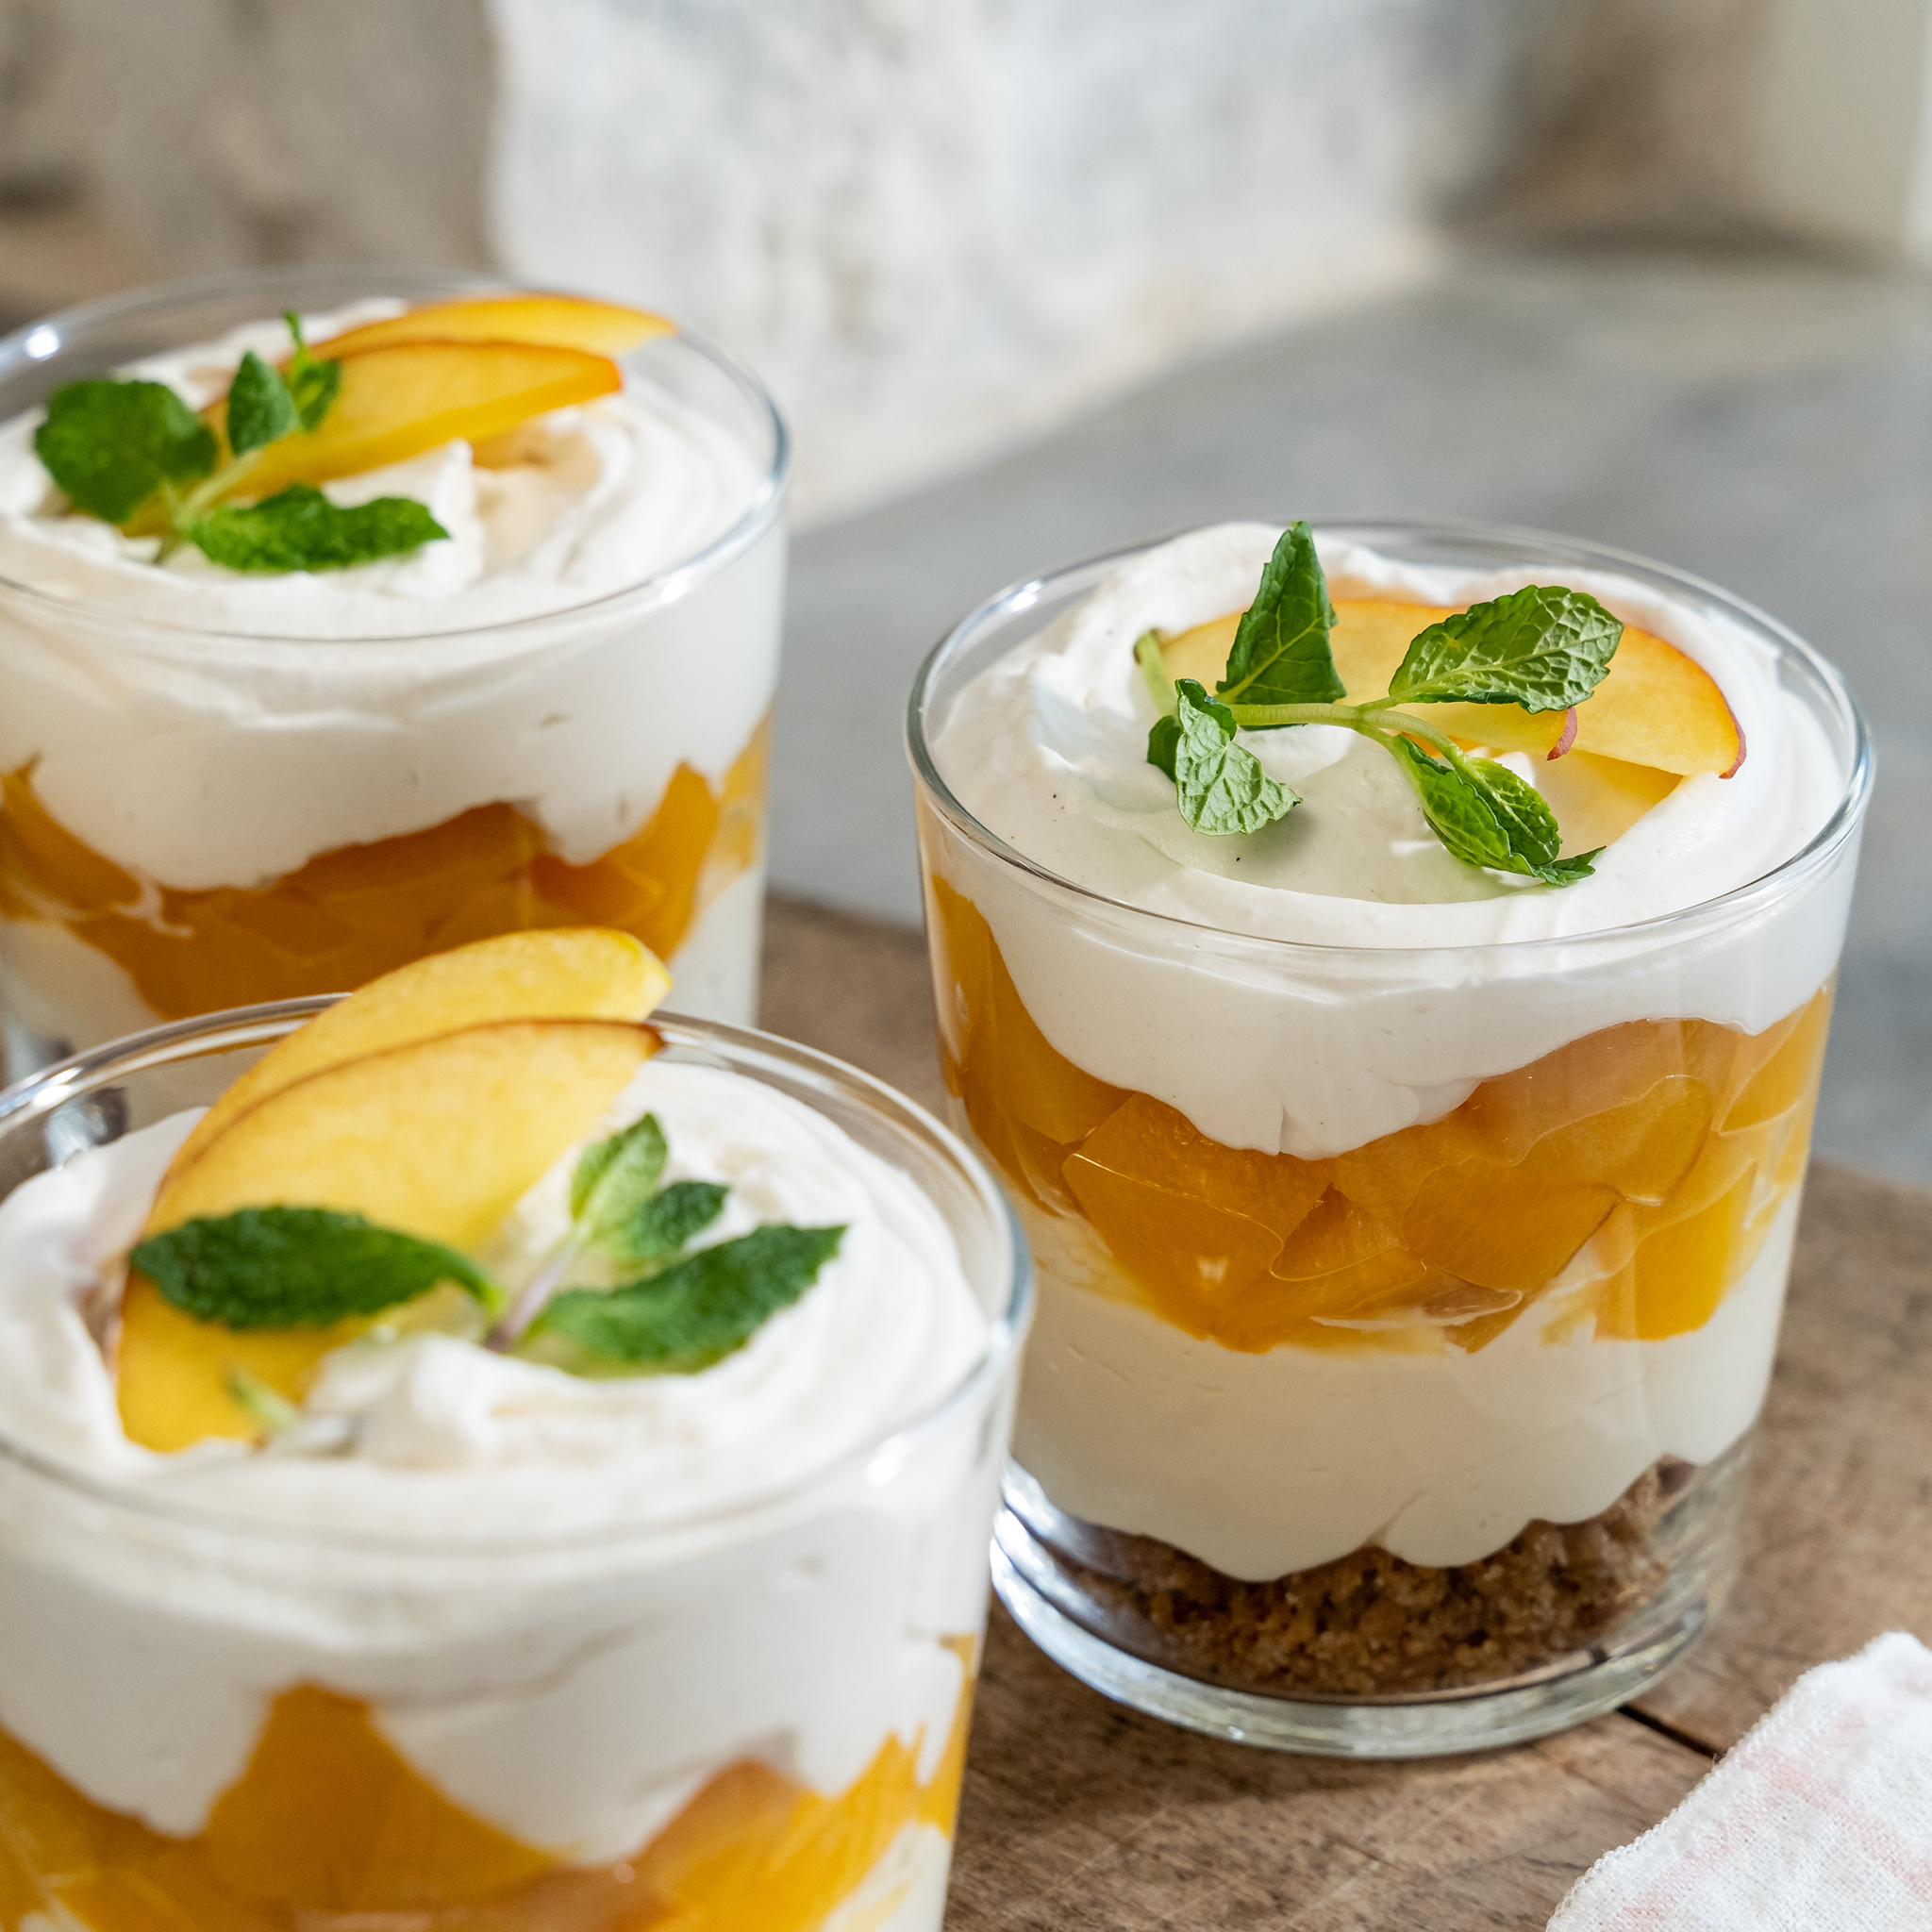 Joanna Gaines' Peach Trifle with Spiced Whipped Cream